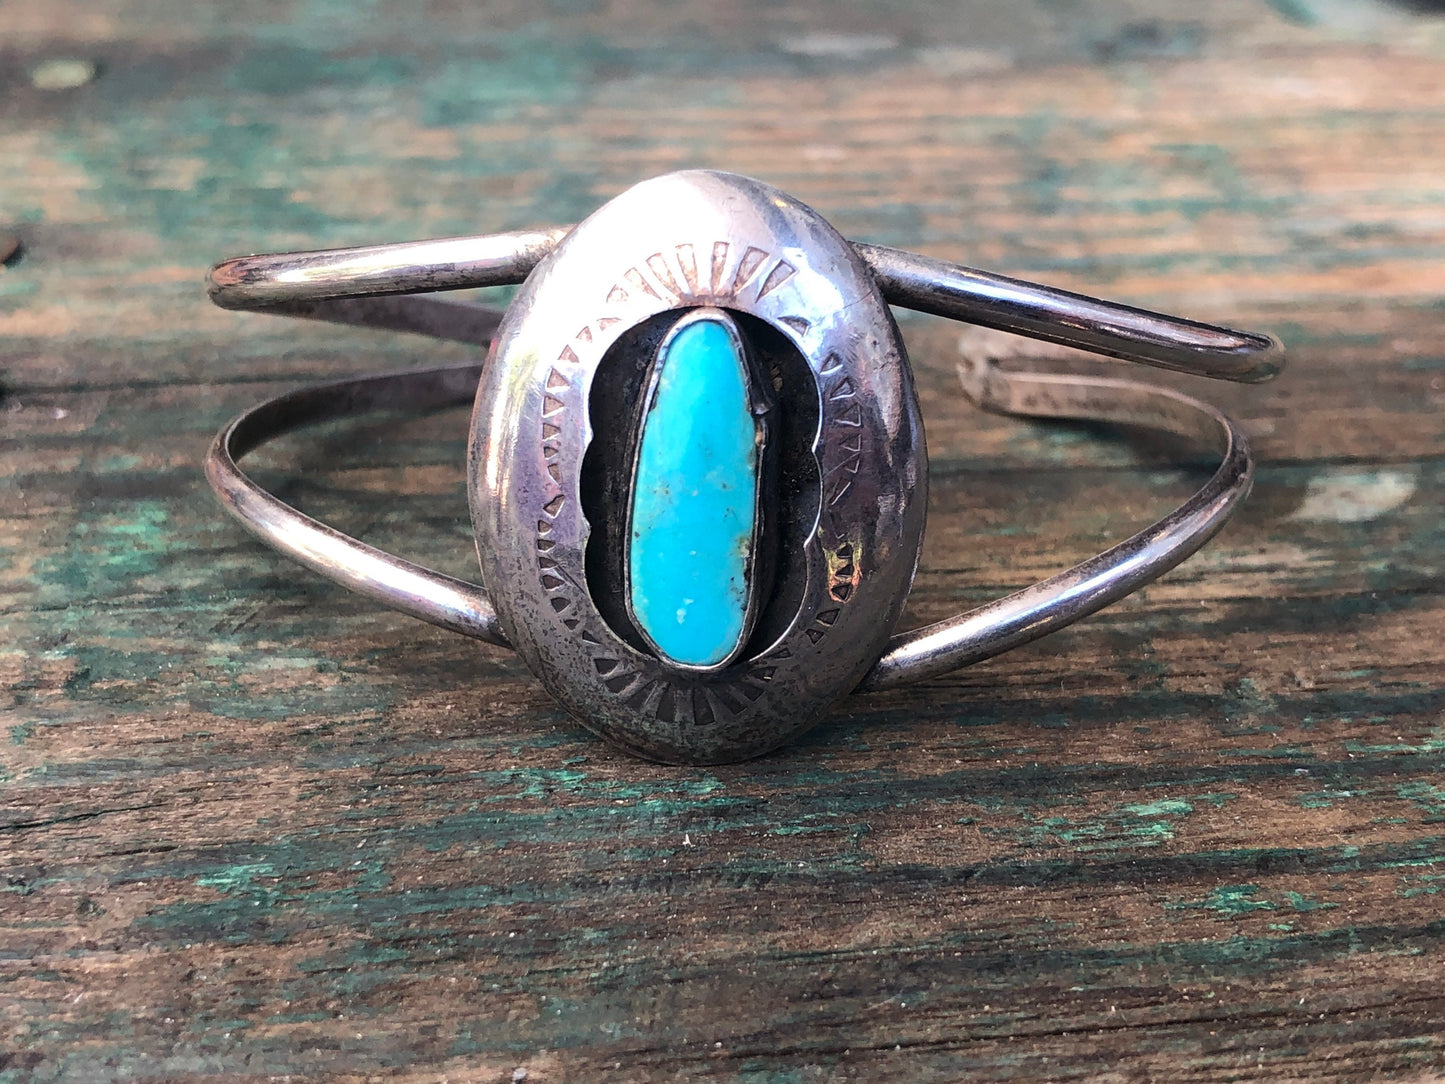 Vintage Native American Navajo Shadowbox Elongated Turquoise Sterling Silver Cuff Bracelet